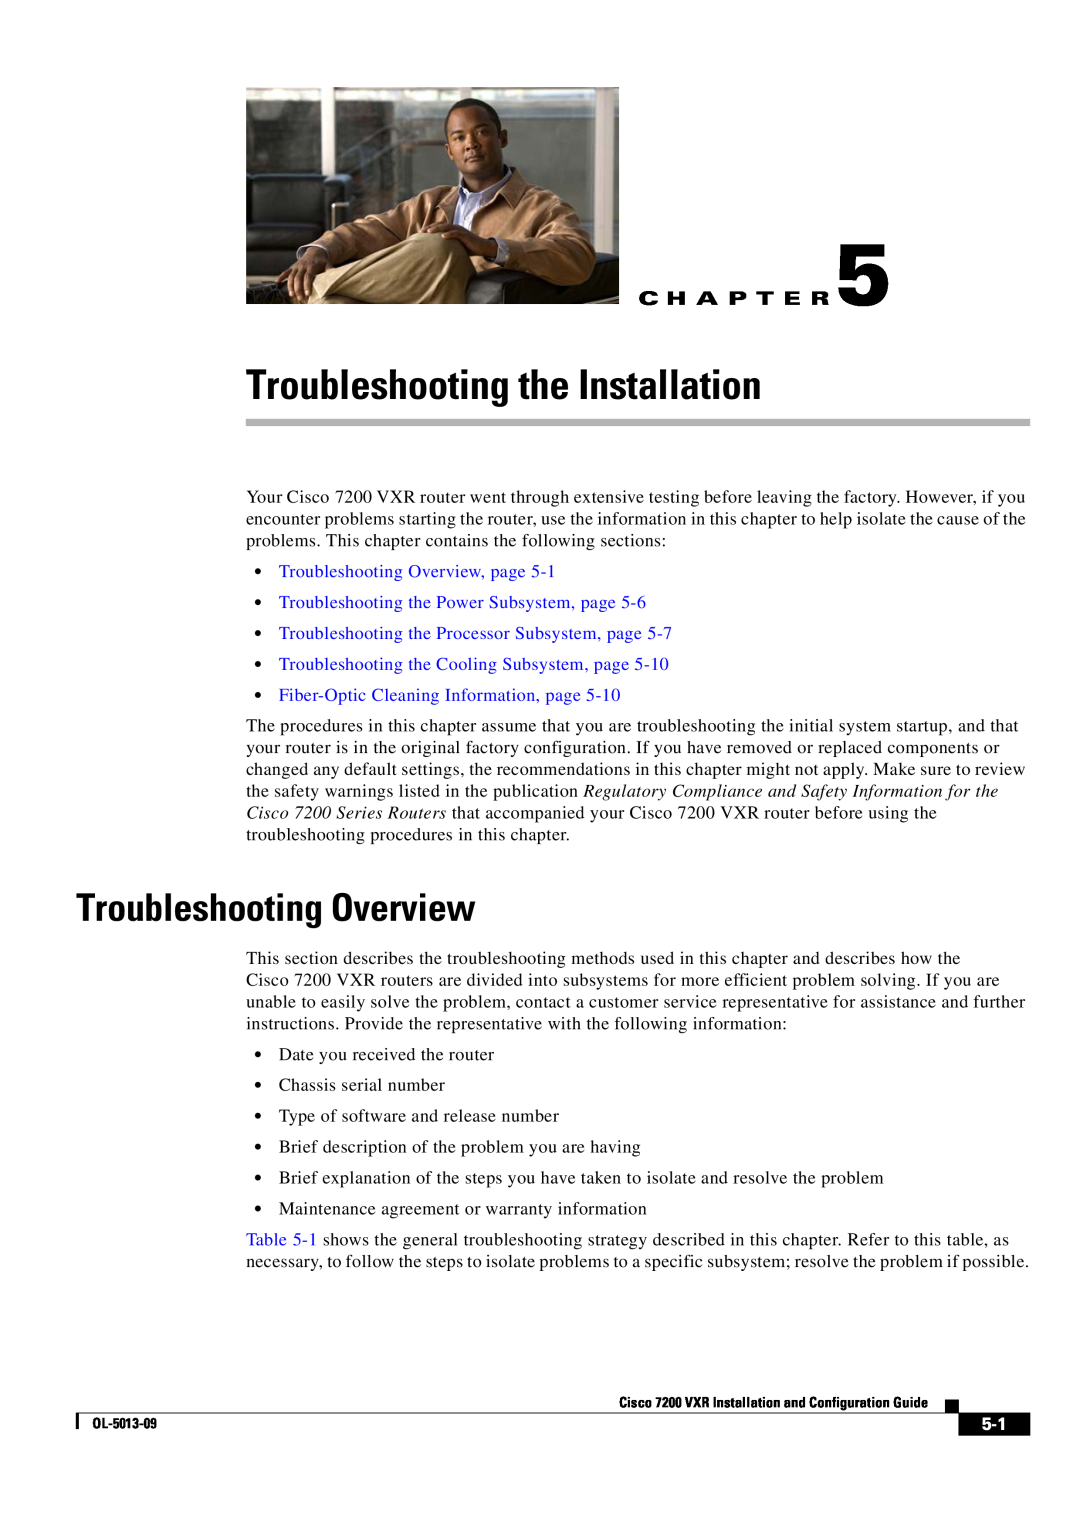 Cisco Systems 7200 VXR manual Troubleshooting the Installation, Troubleshooting Overview, page, C H A P T E R 